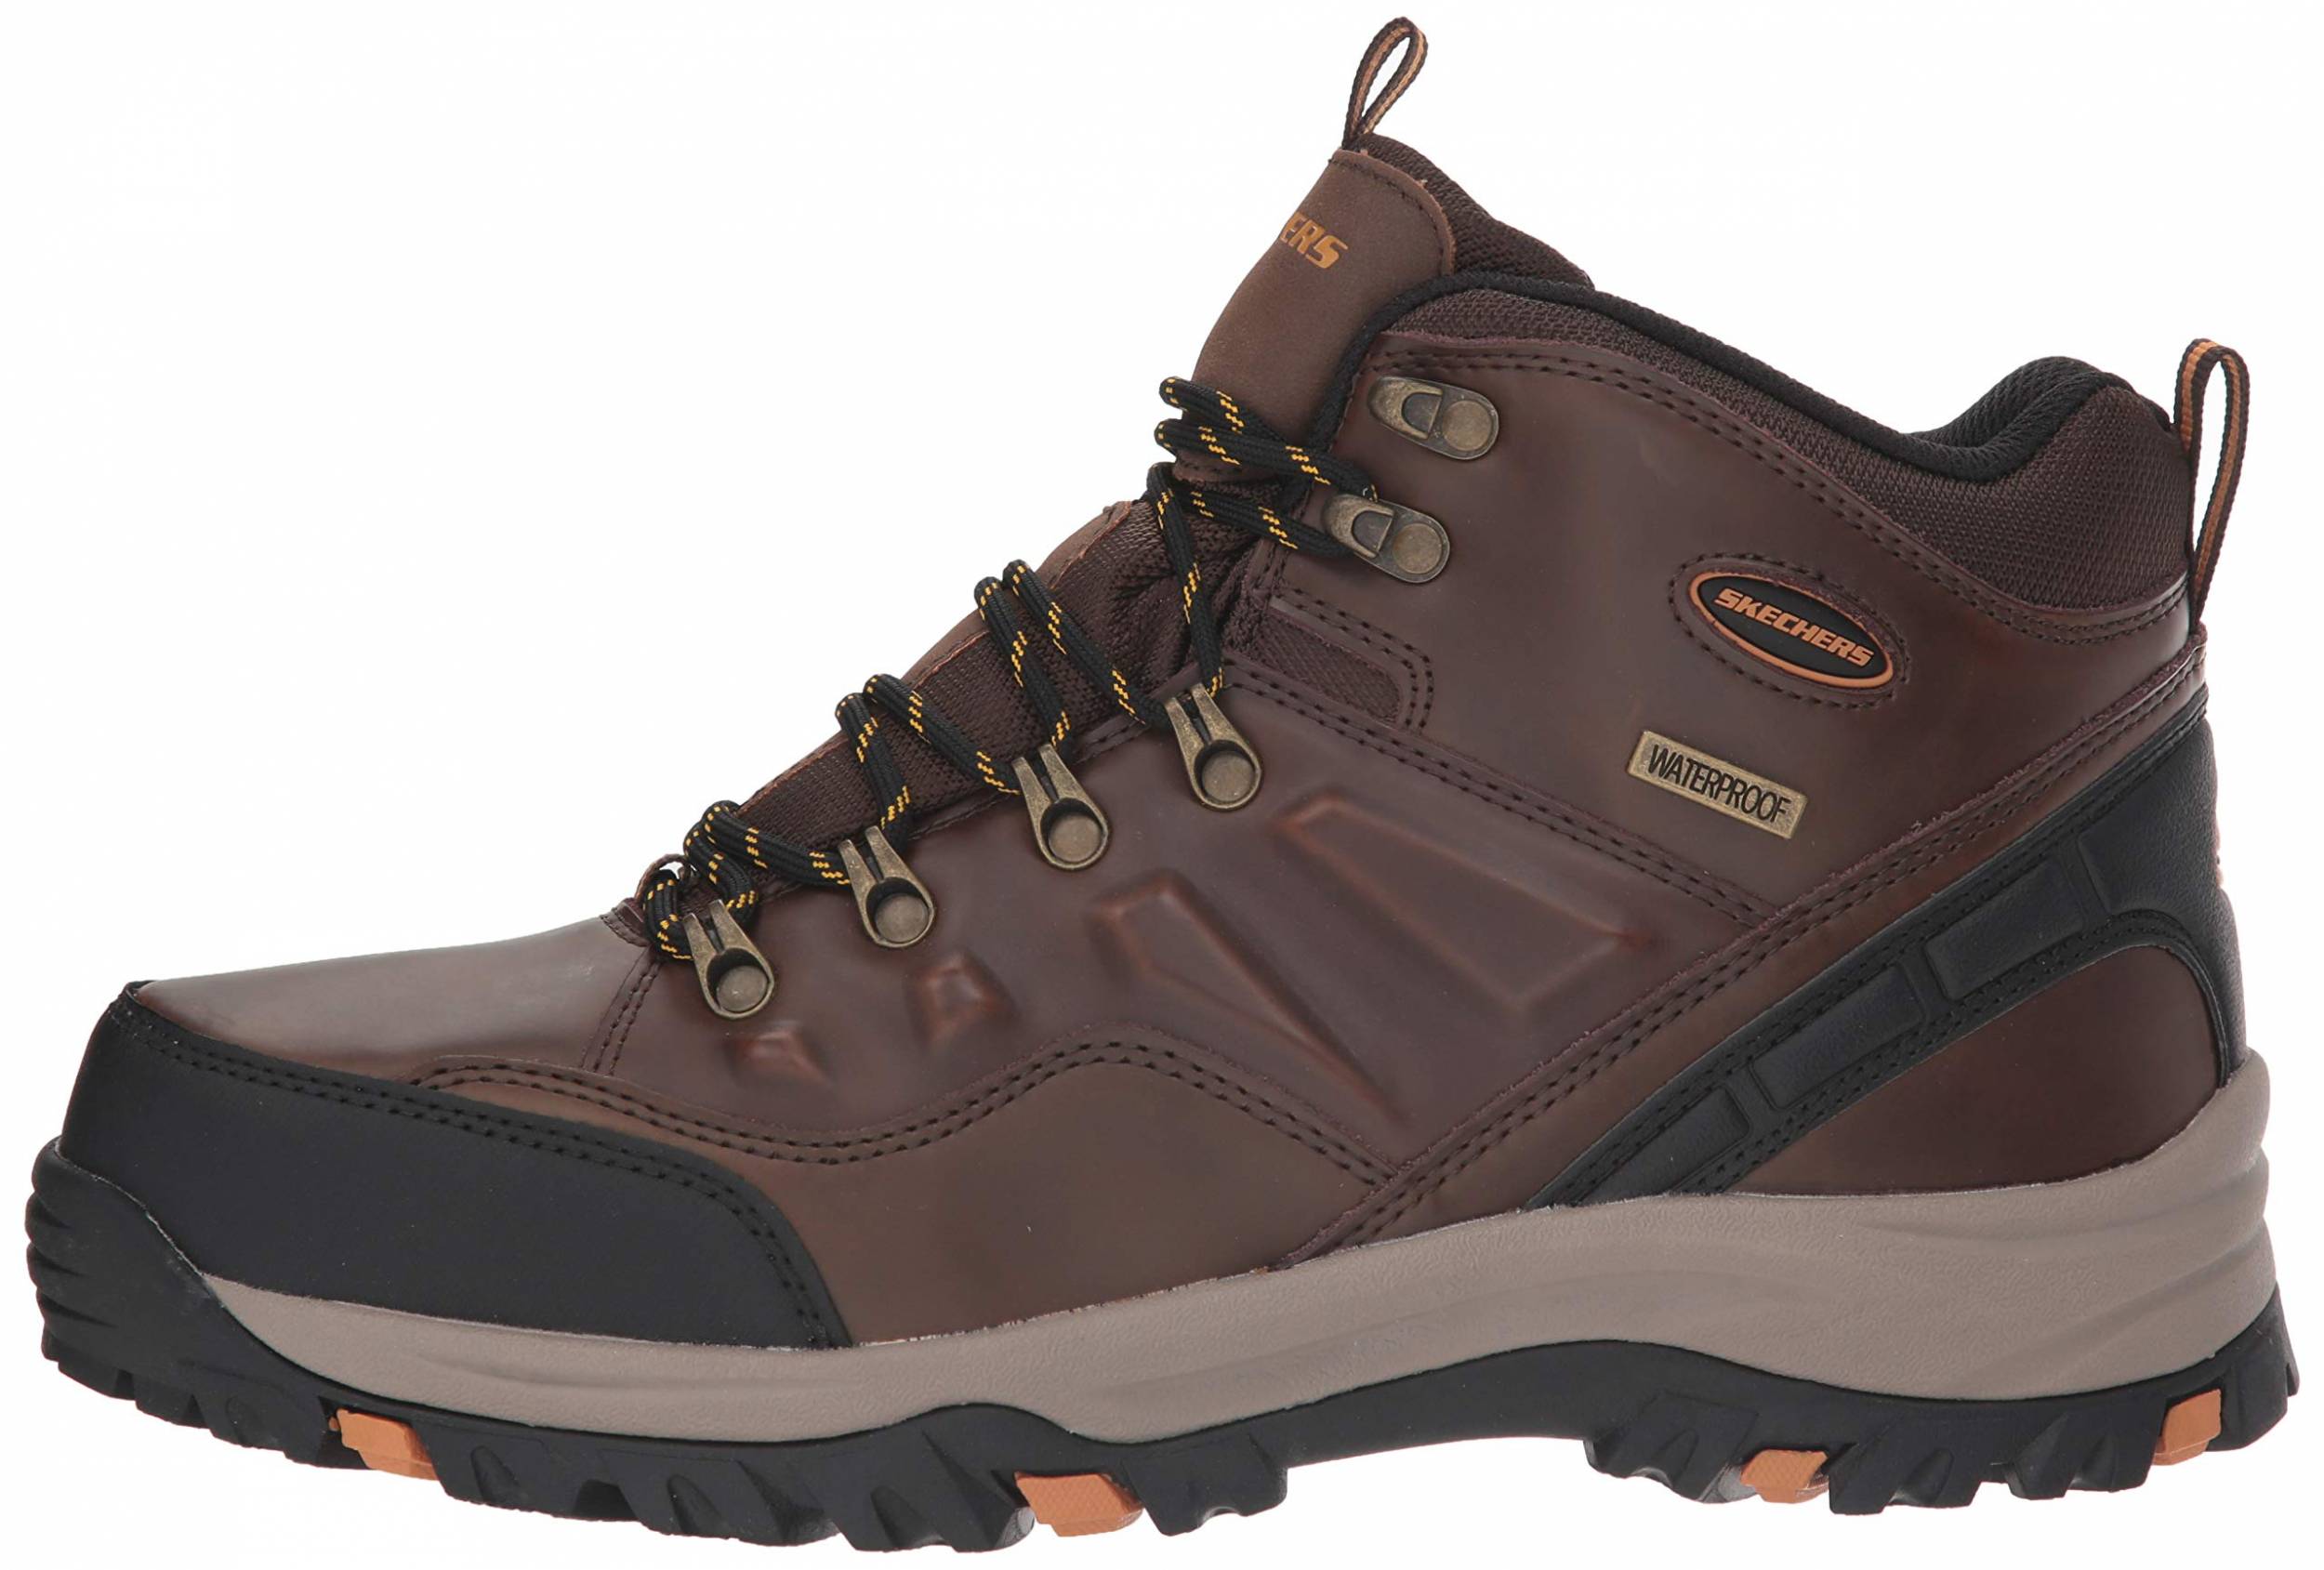 Save 32% on Skechers Hiking Boots (2 